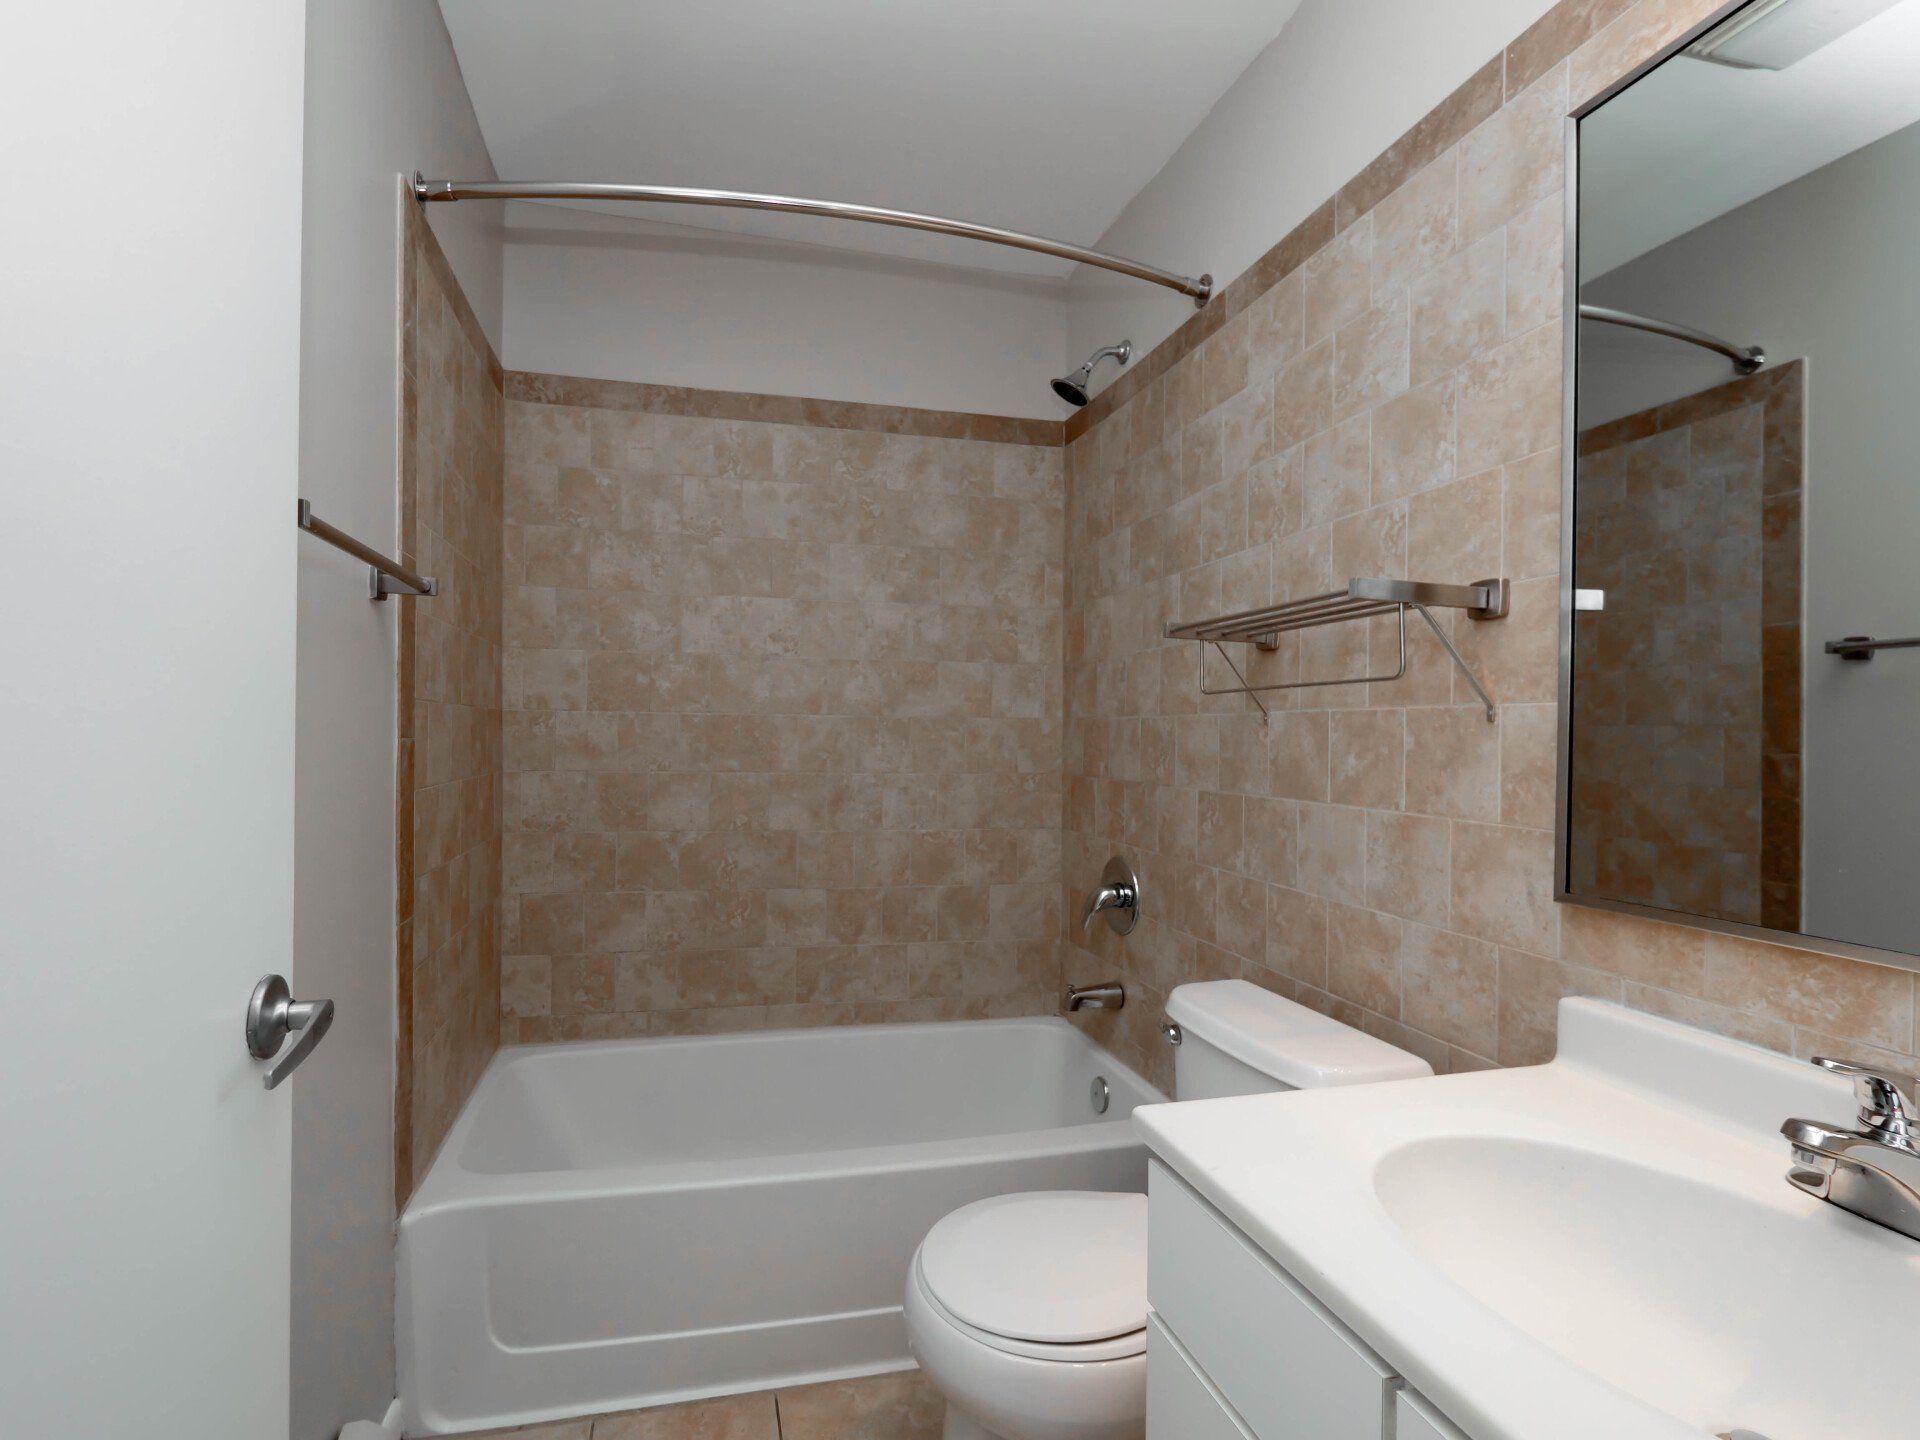 A bathroom with a tub, toilet, sink, and mirror at Reside on Morse.